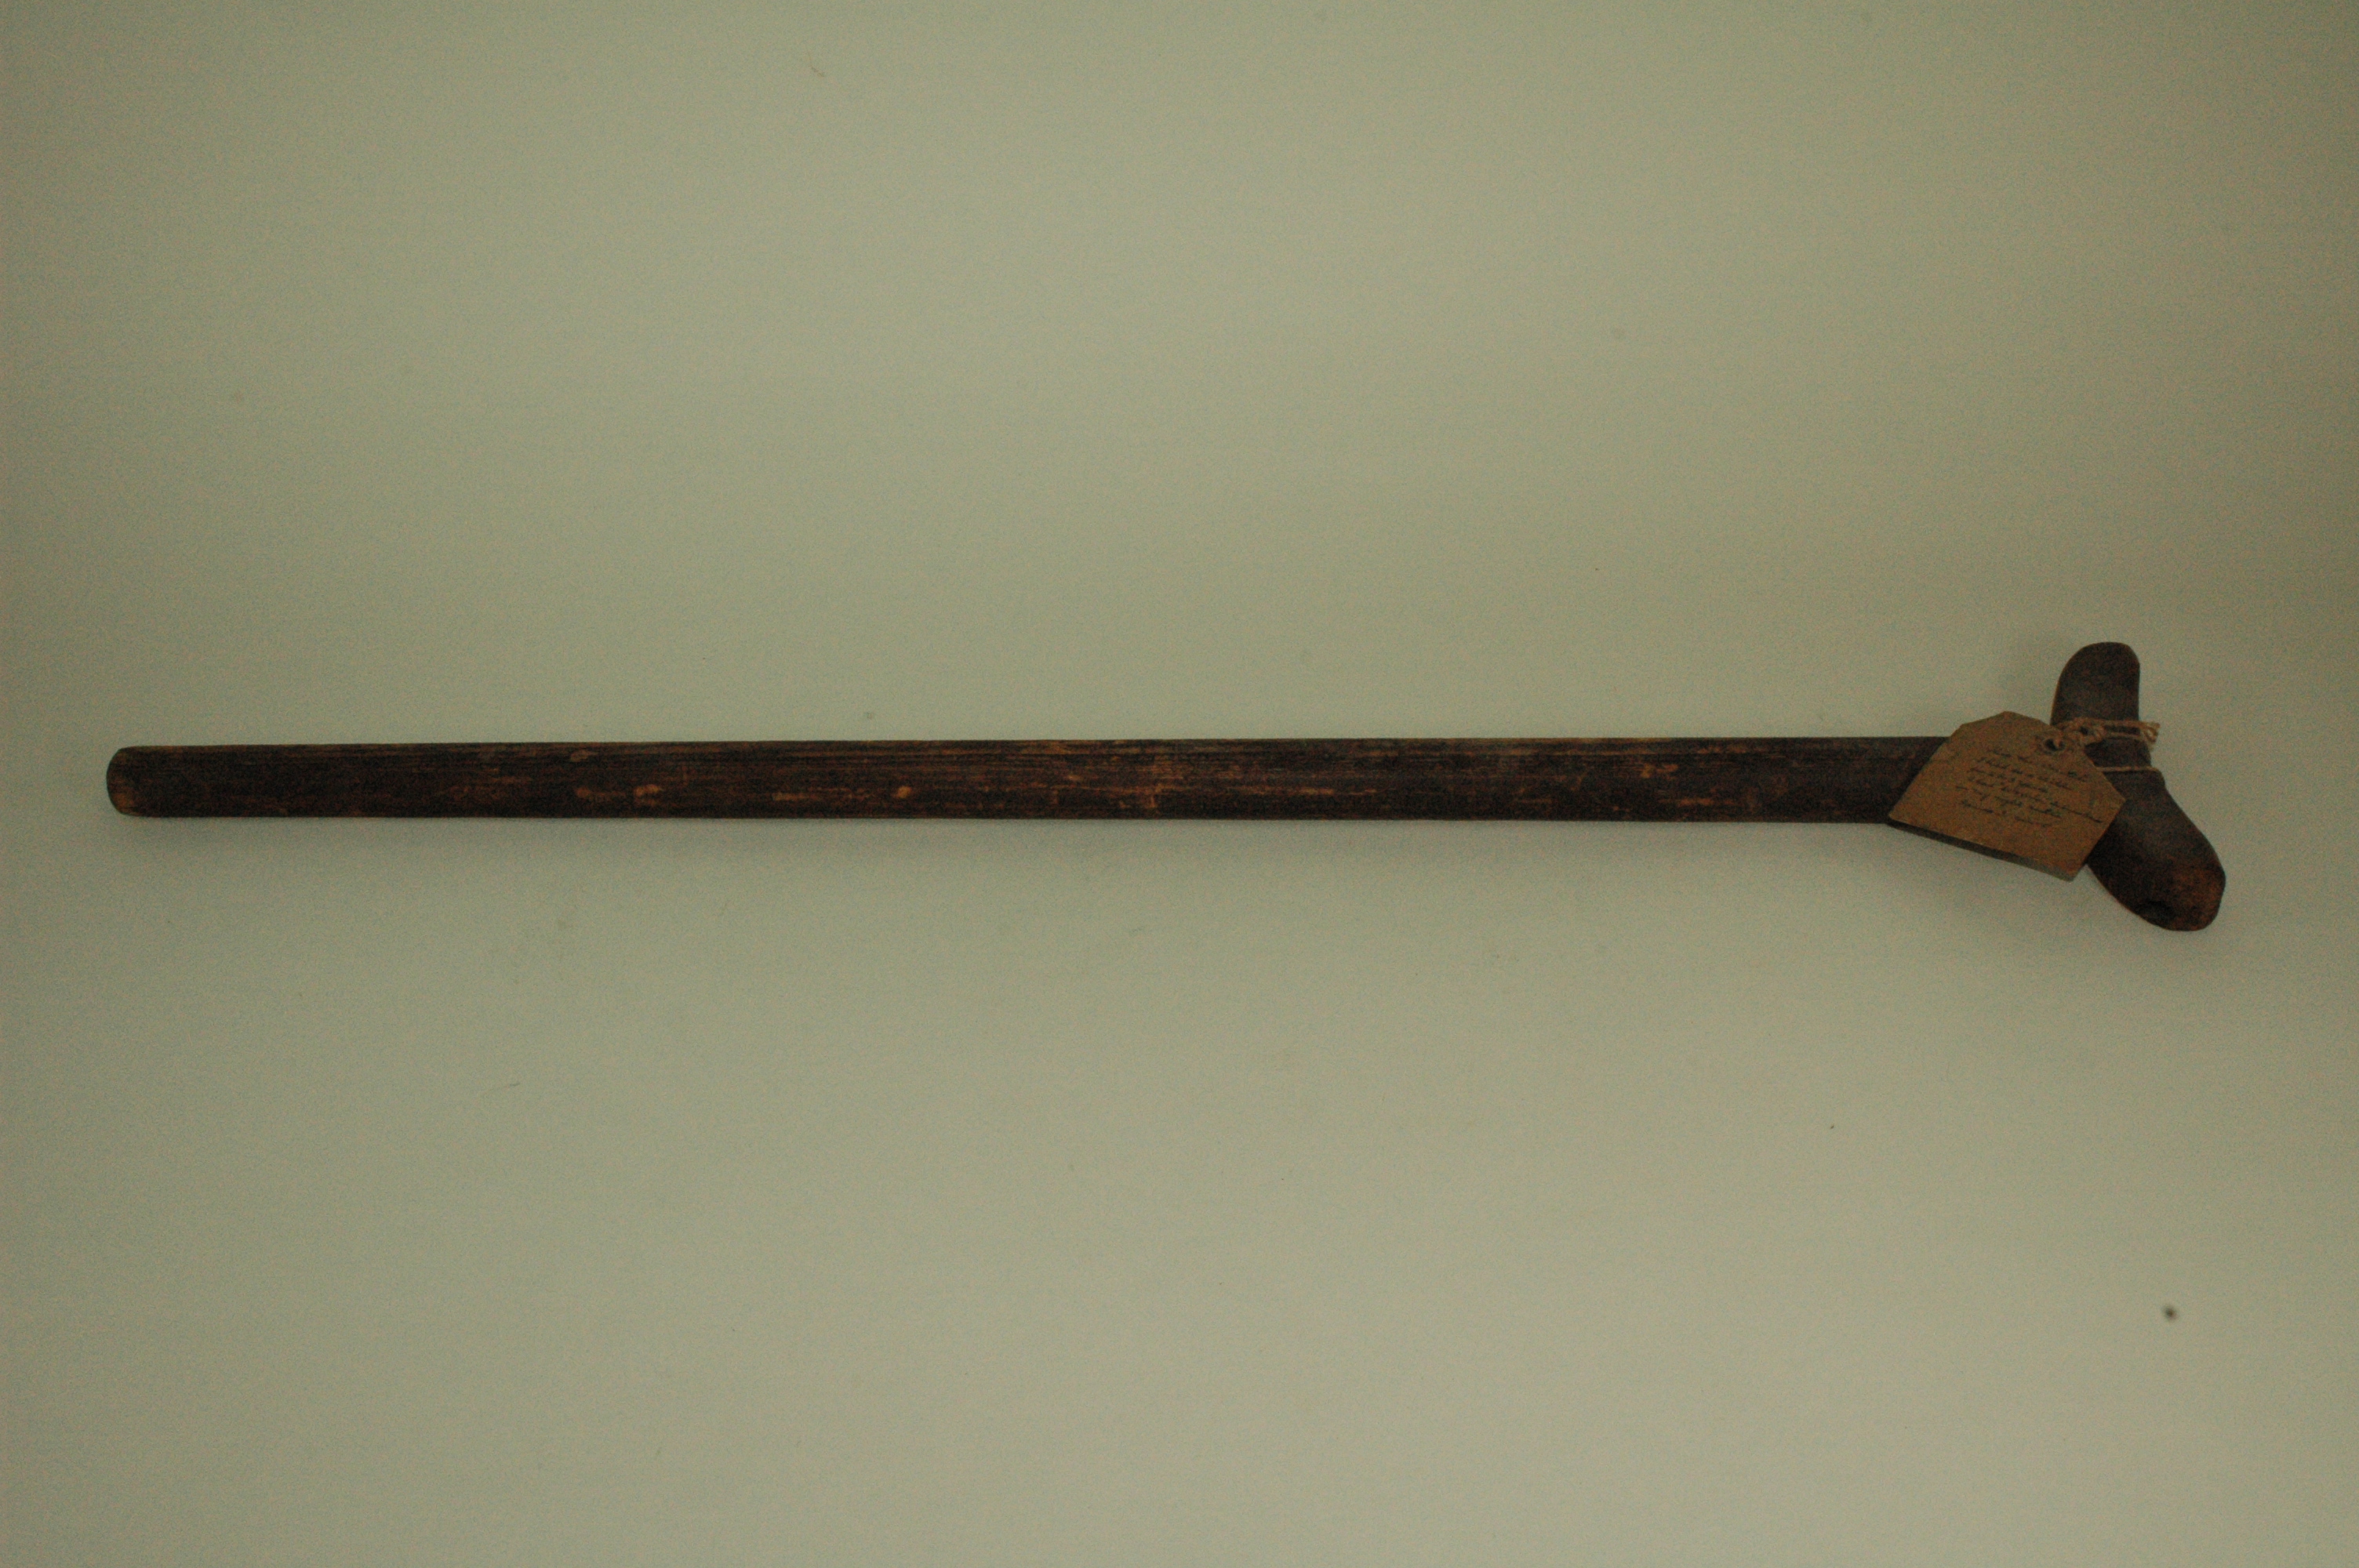 Simple wooden crutch for use by a child.  Constructed by nailing crescent-shaped underarm support piece to long wooden shaft.